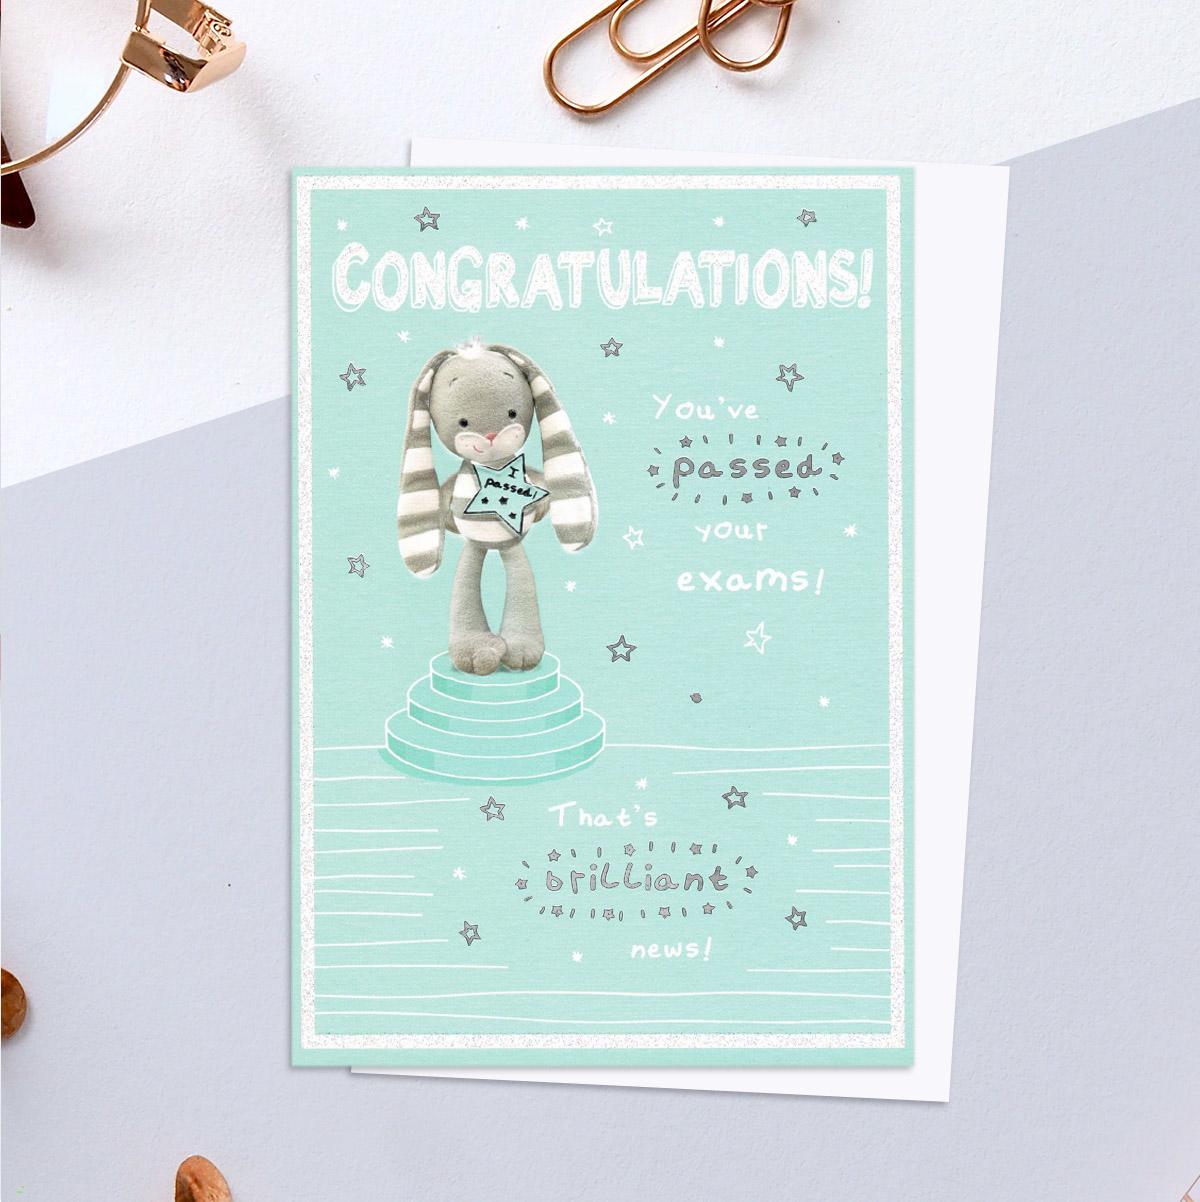 Congratulations You've Passed Your Exams Card Front Image